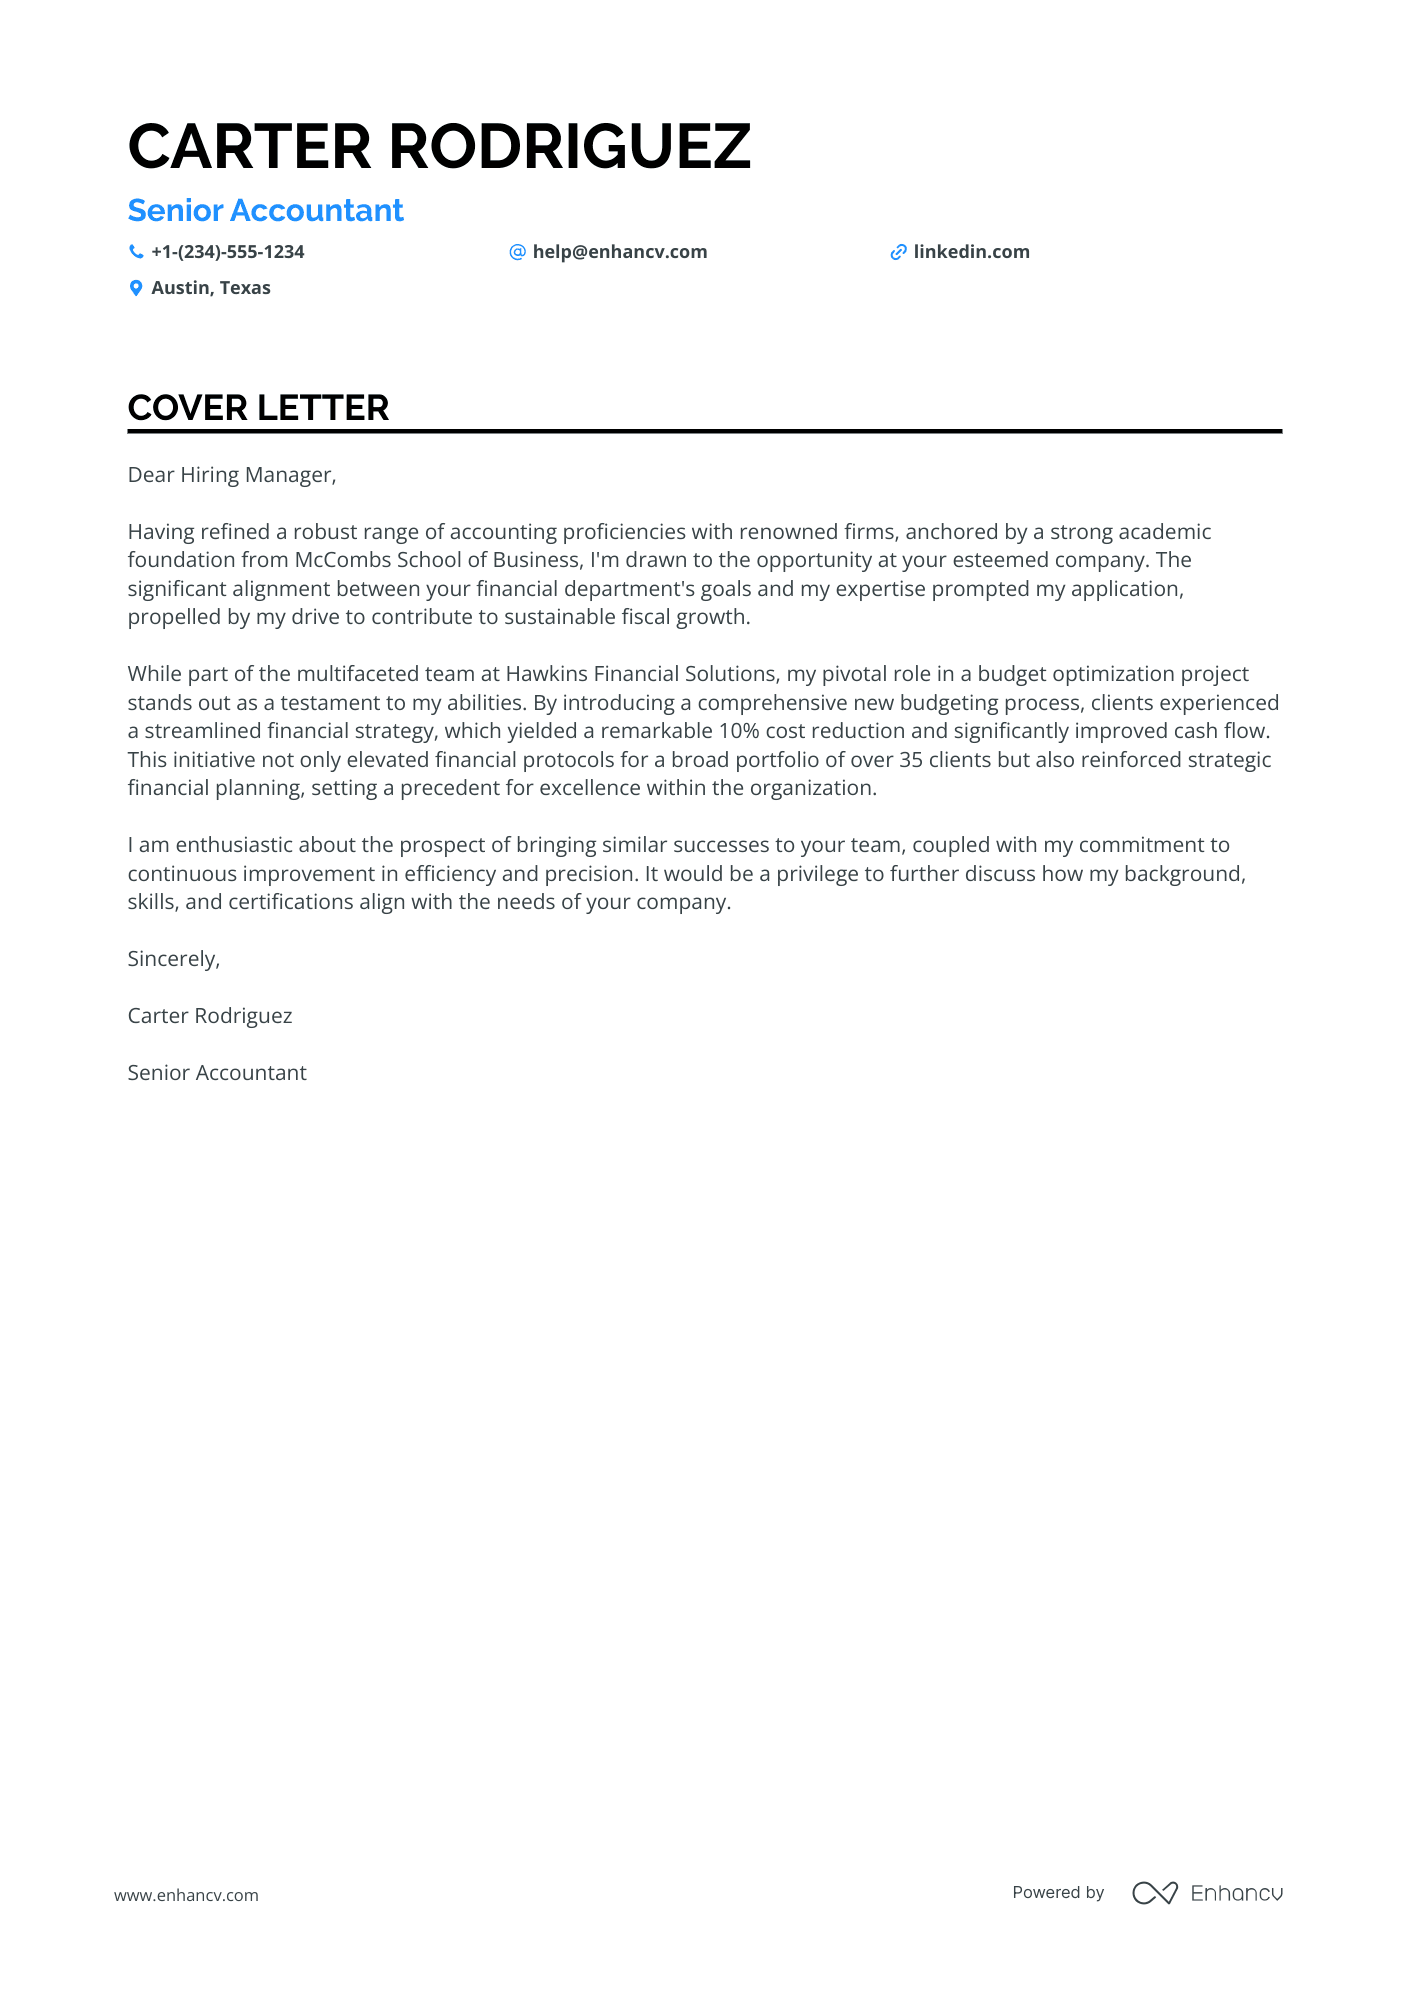 Full Cycle Accounting cover letter